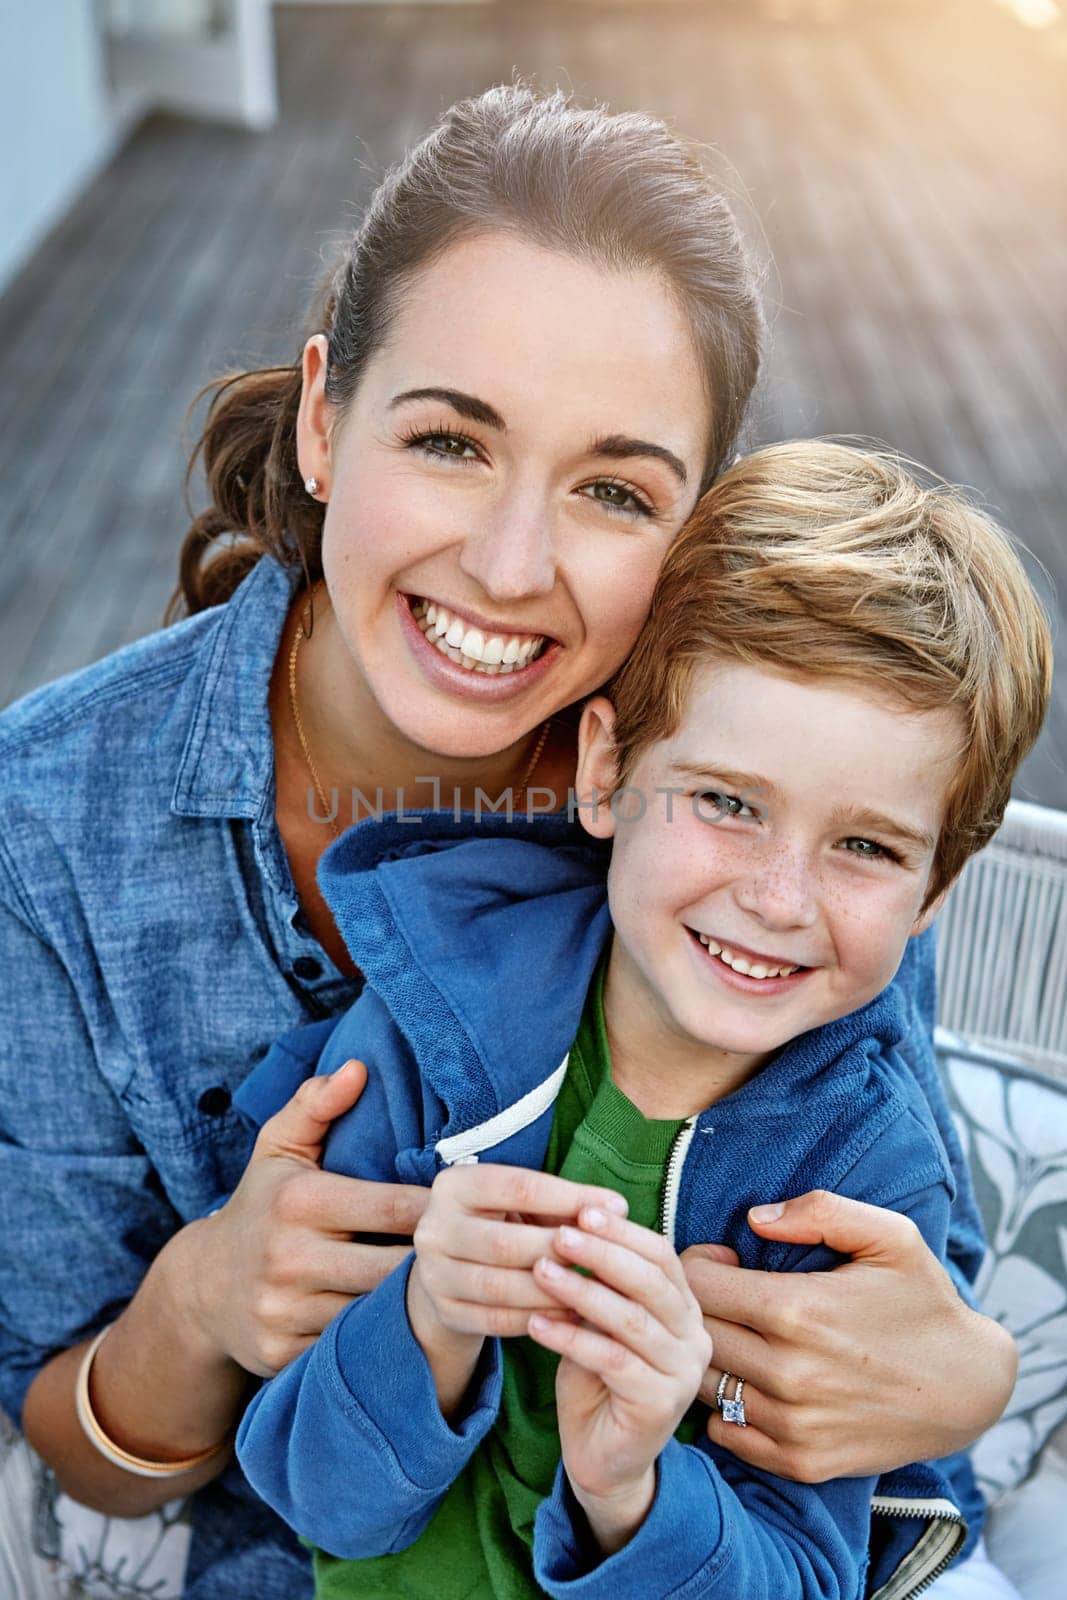 This little guy stole my heart. Portrait of a happy mother and her son outdoors